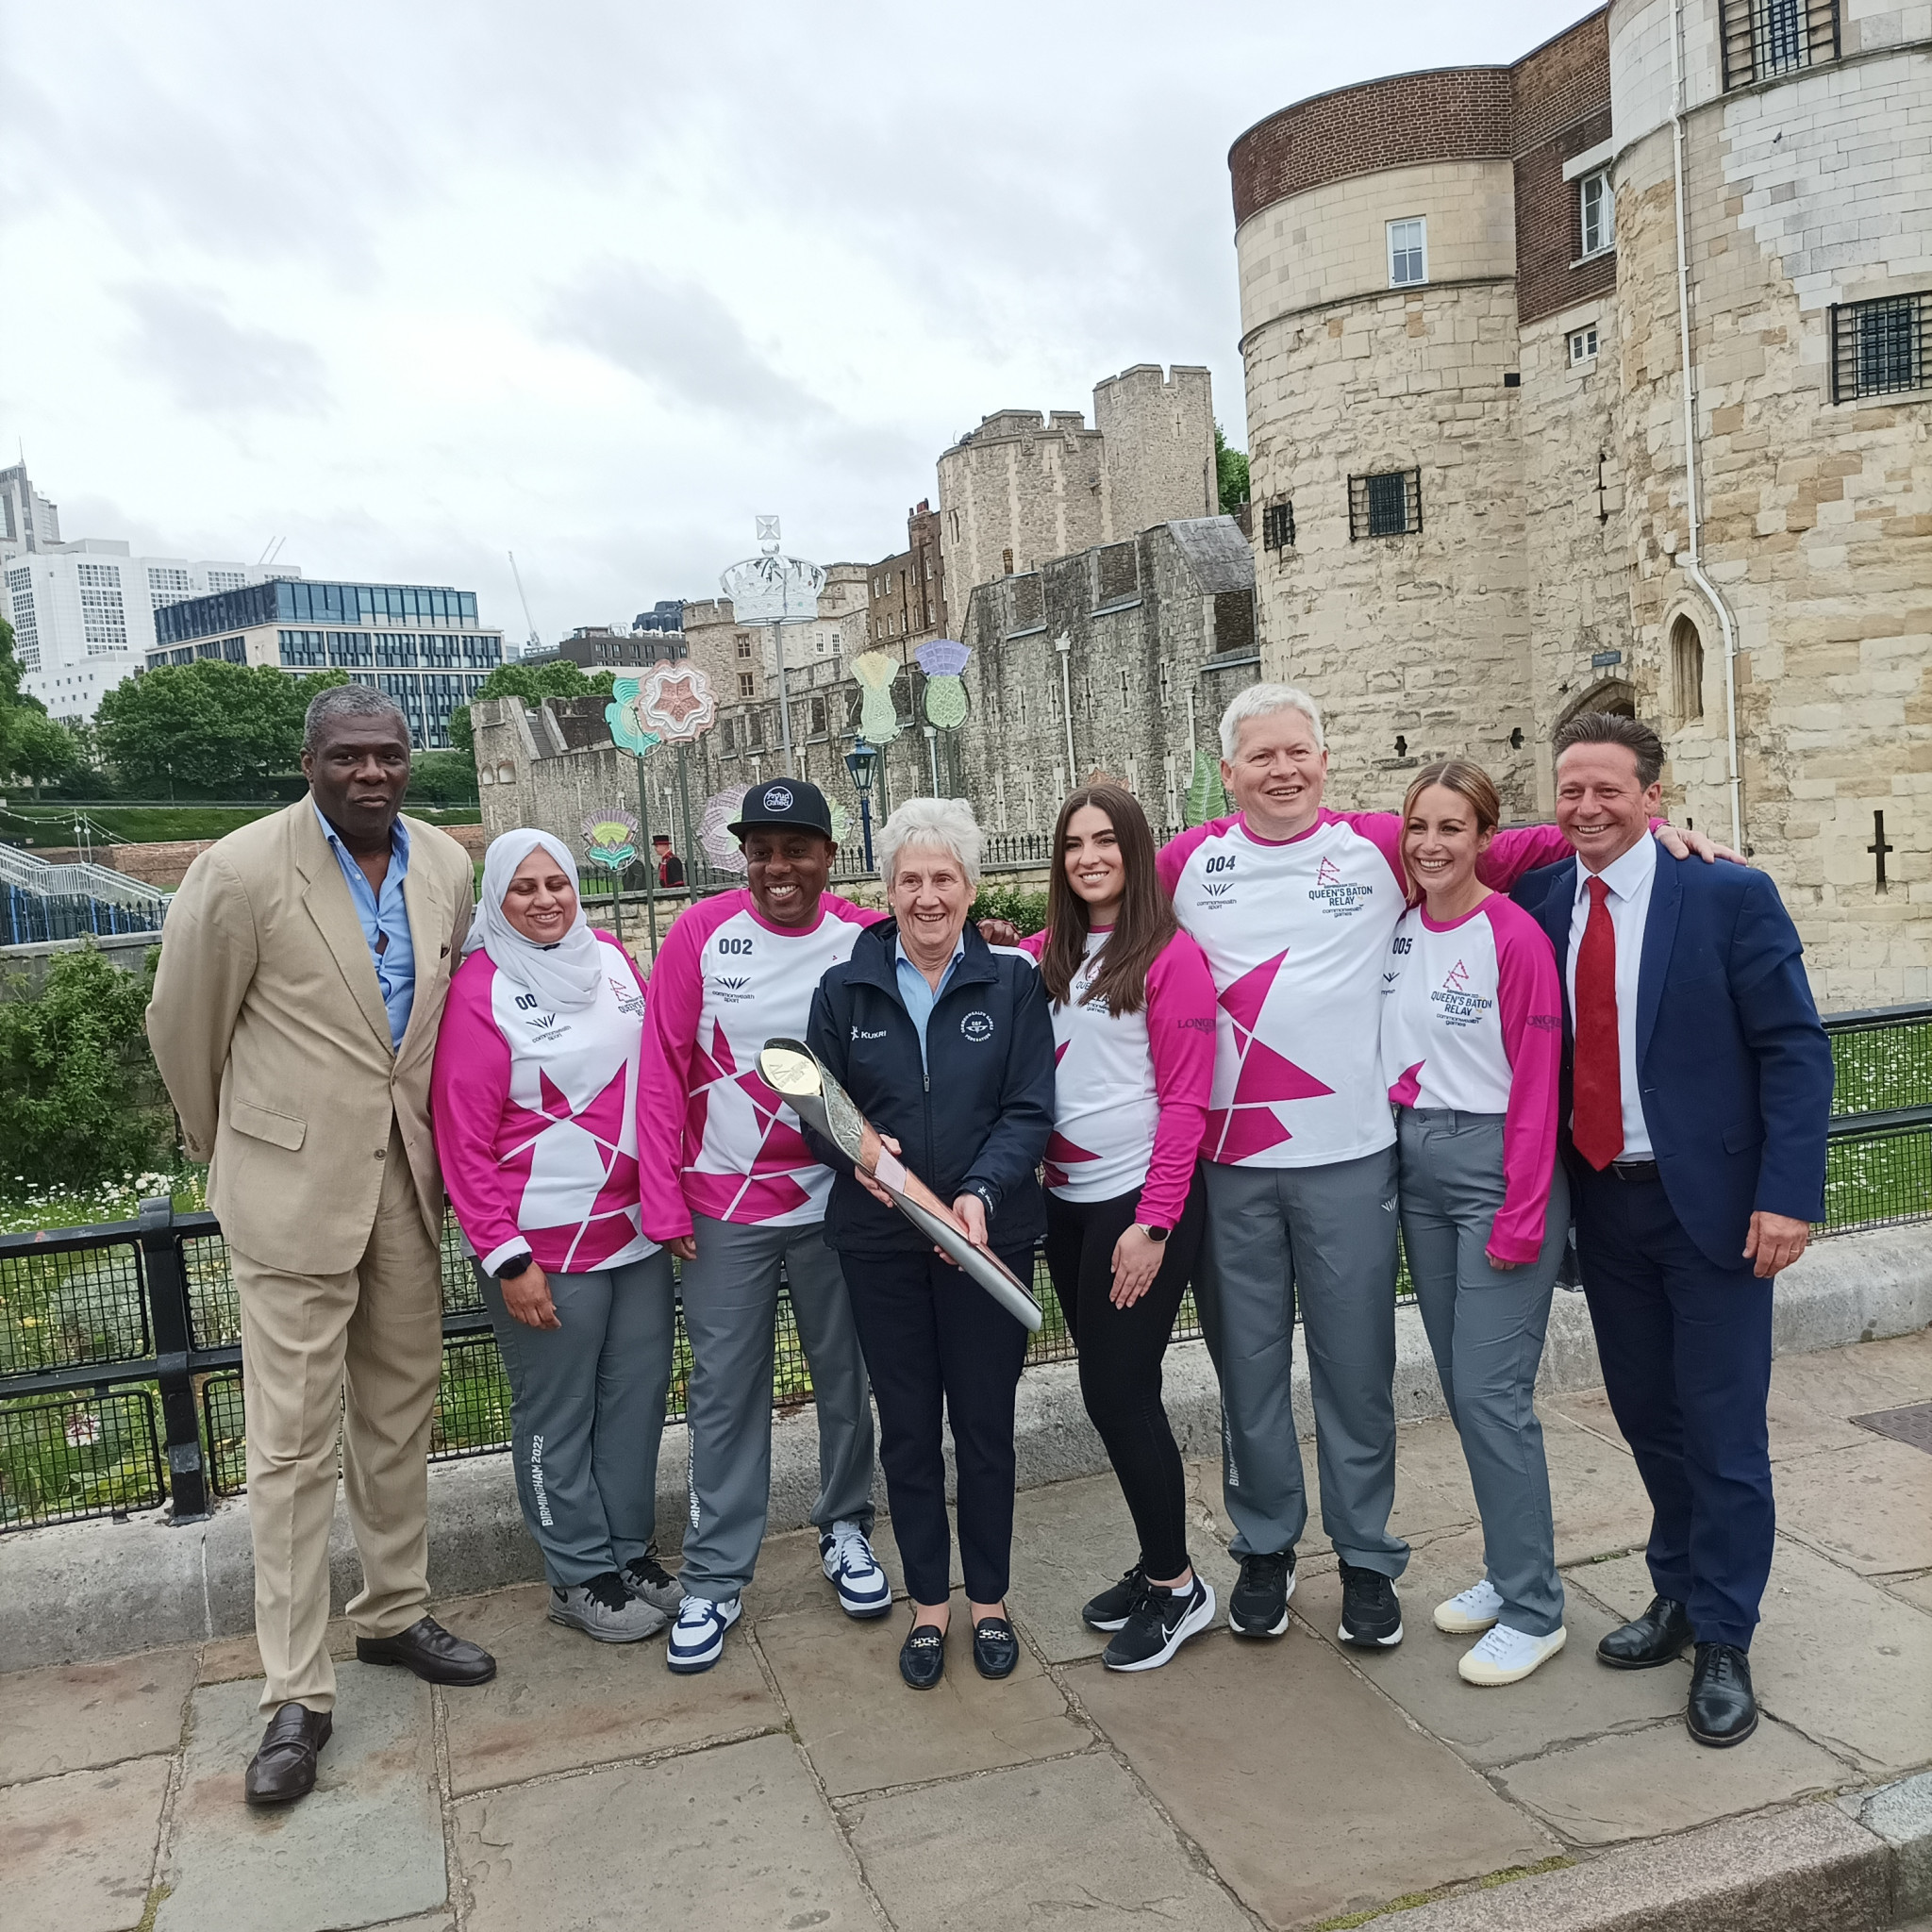 Birmingham 2022 deputy chairman Geoff Thompson, left, Commonwealth Games Federation President Dame Louise Martin, centre, and British Sports Minister Nigel Huddleston, right, with the Batonbearers at the Tower of London ©ITG